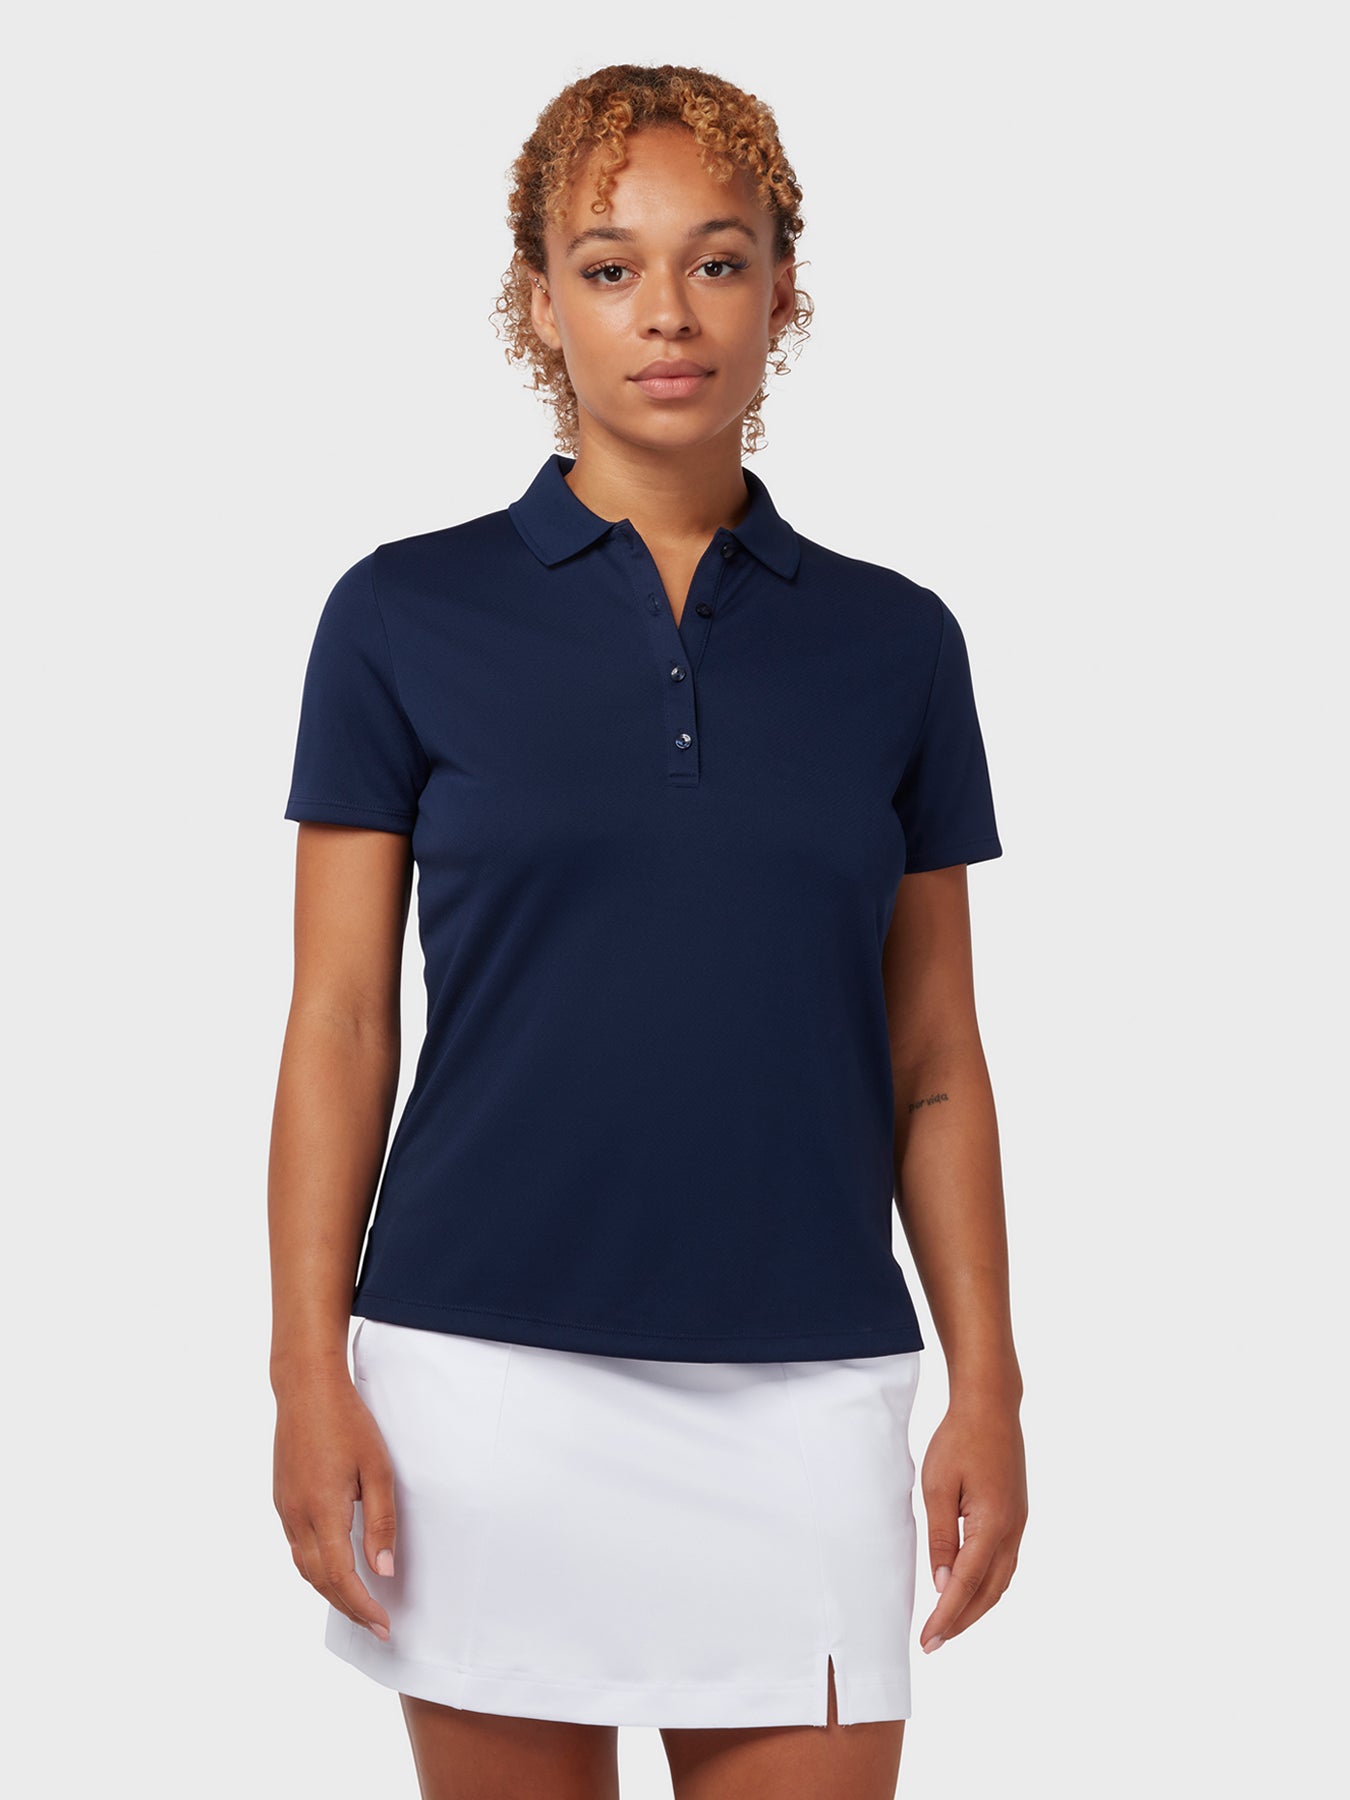 View Swing Tech Womens Polo In Peacoat Peacoat S information